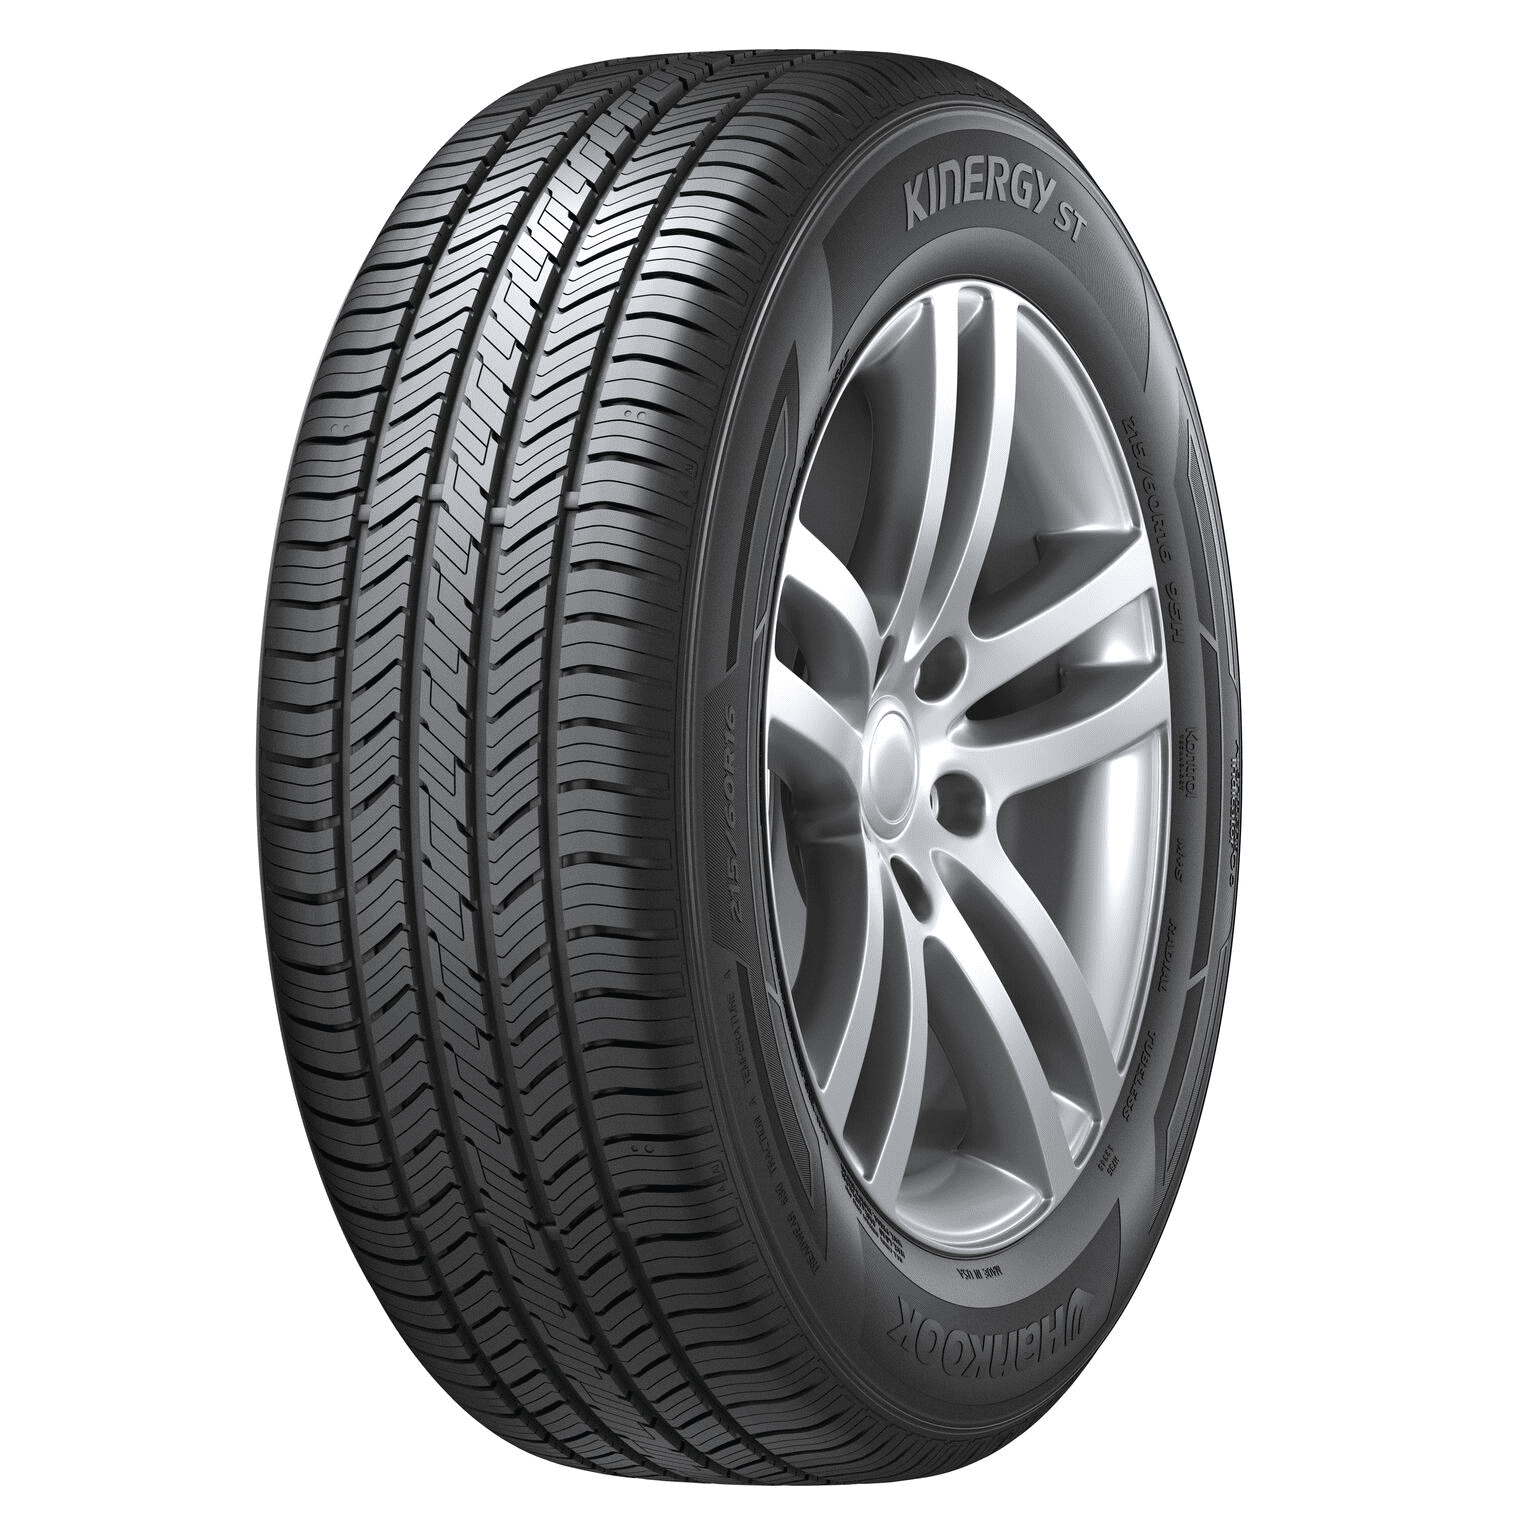 215/75-15 Toyo Observe GSi-5 Winter Performance Studless Tire 100T 2157515 